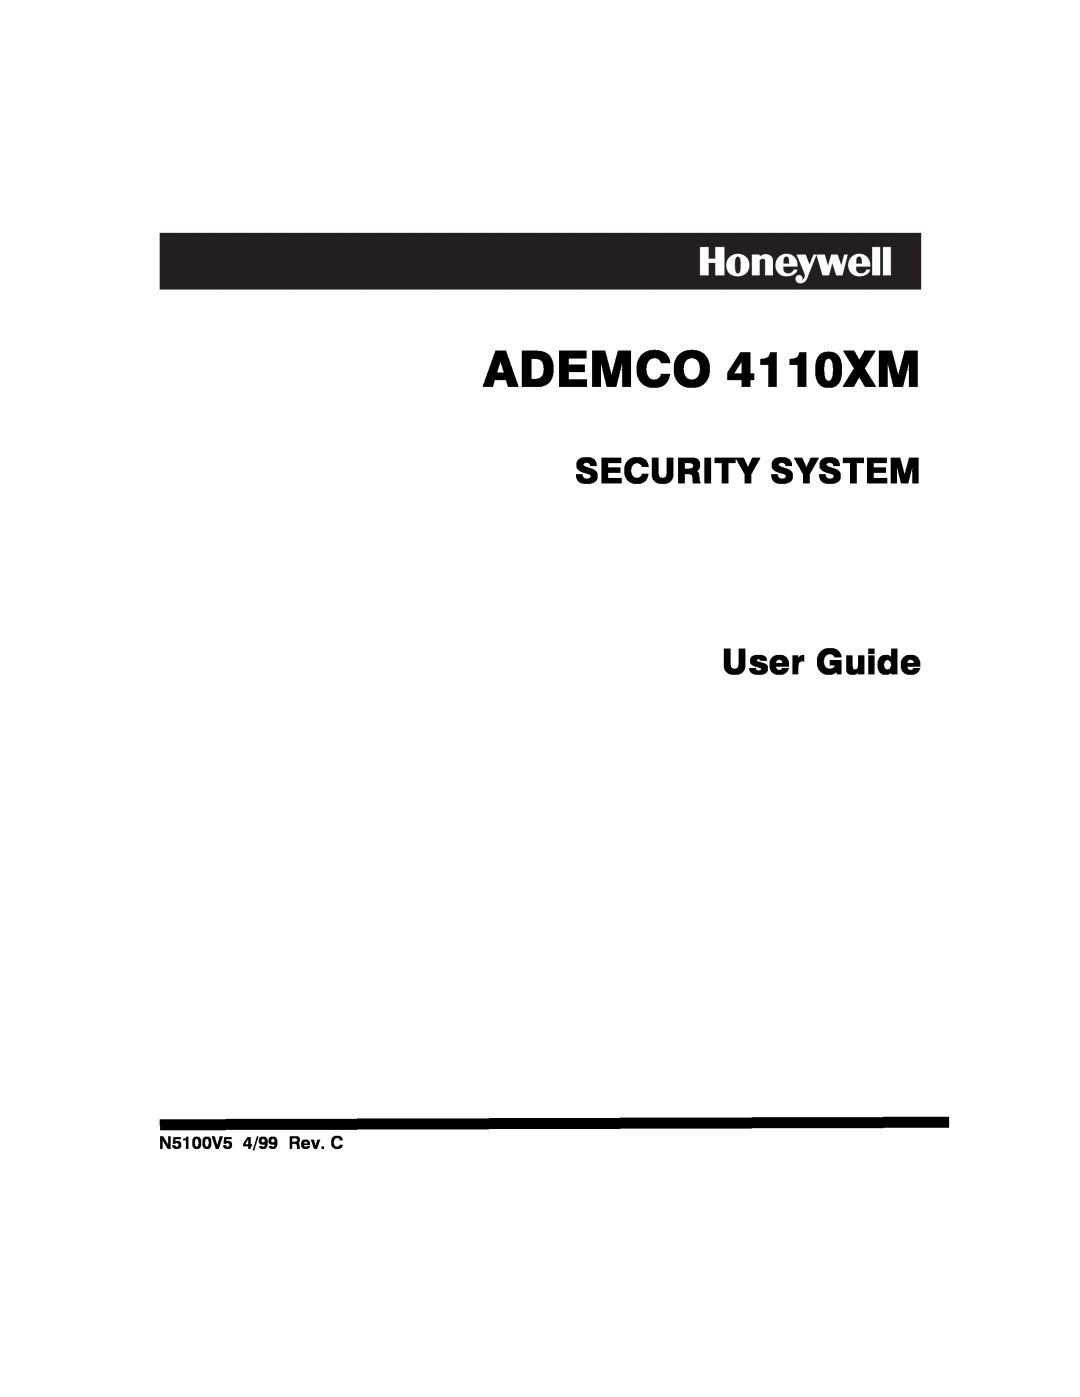 Honeywell manual ADEMCO 4110XM, SECURITY SYSTEM User Guide 